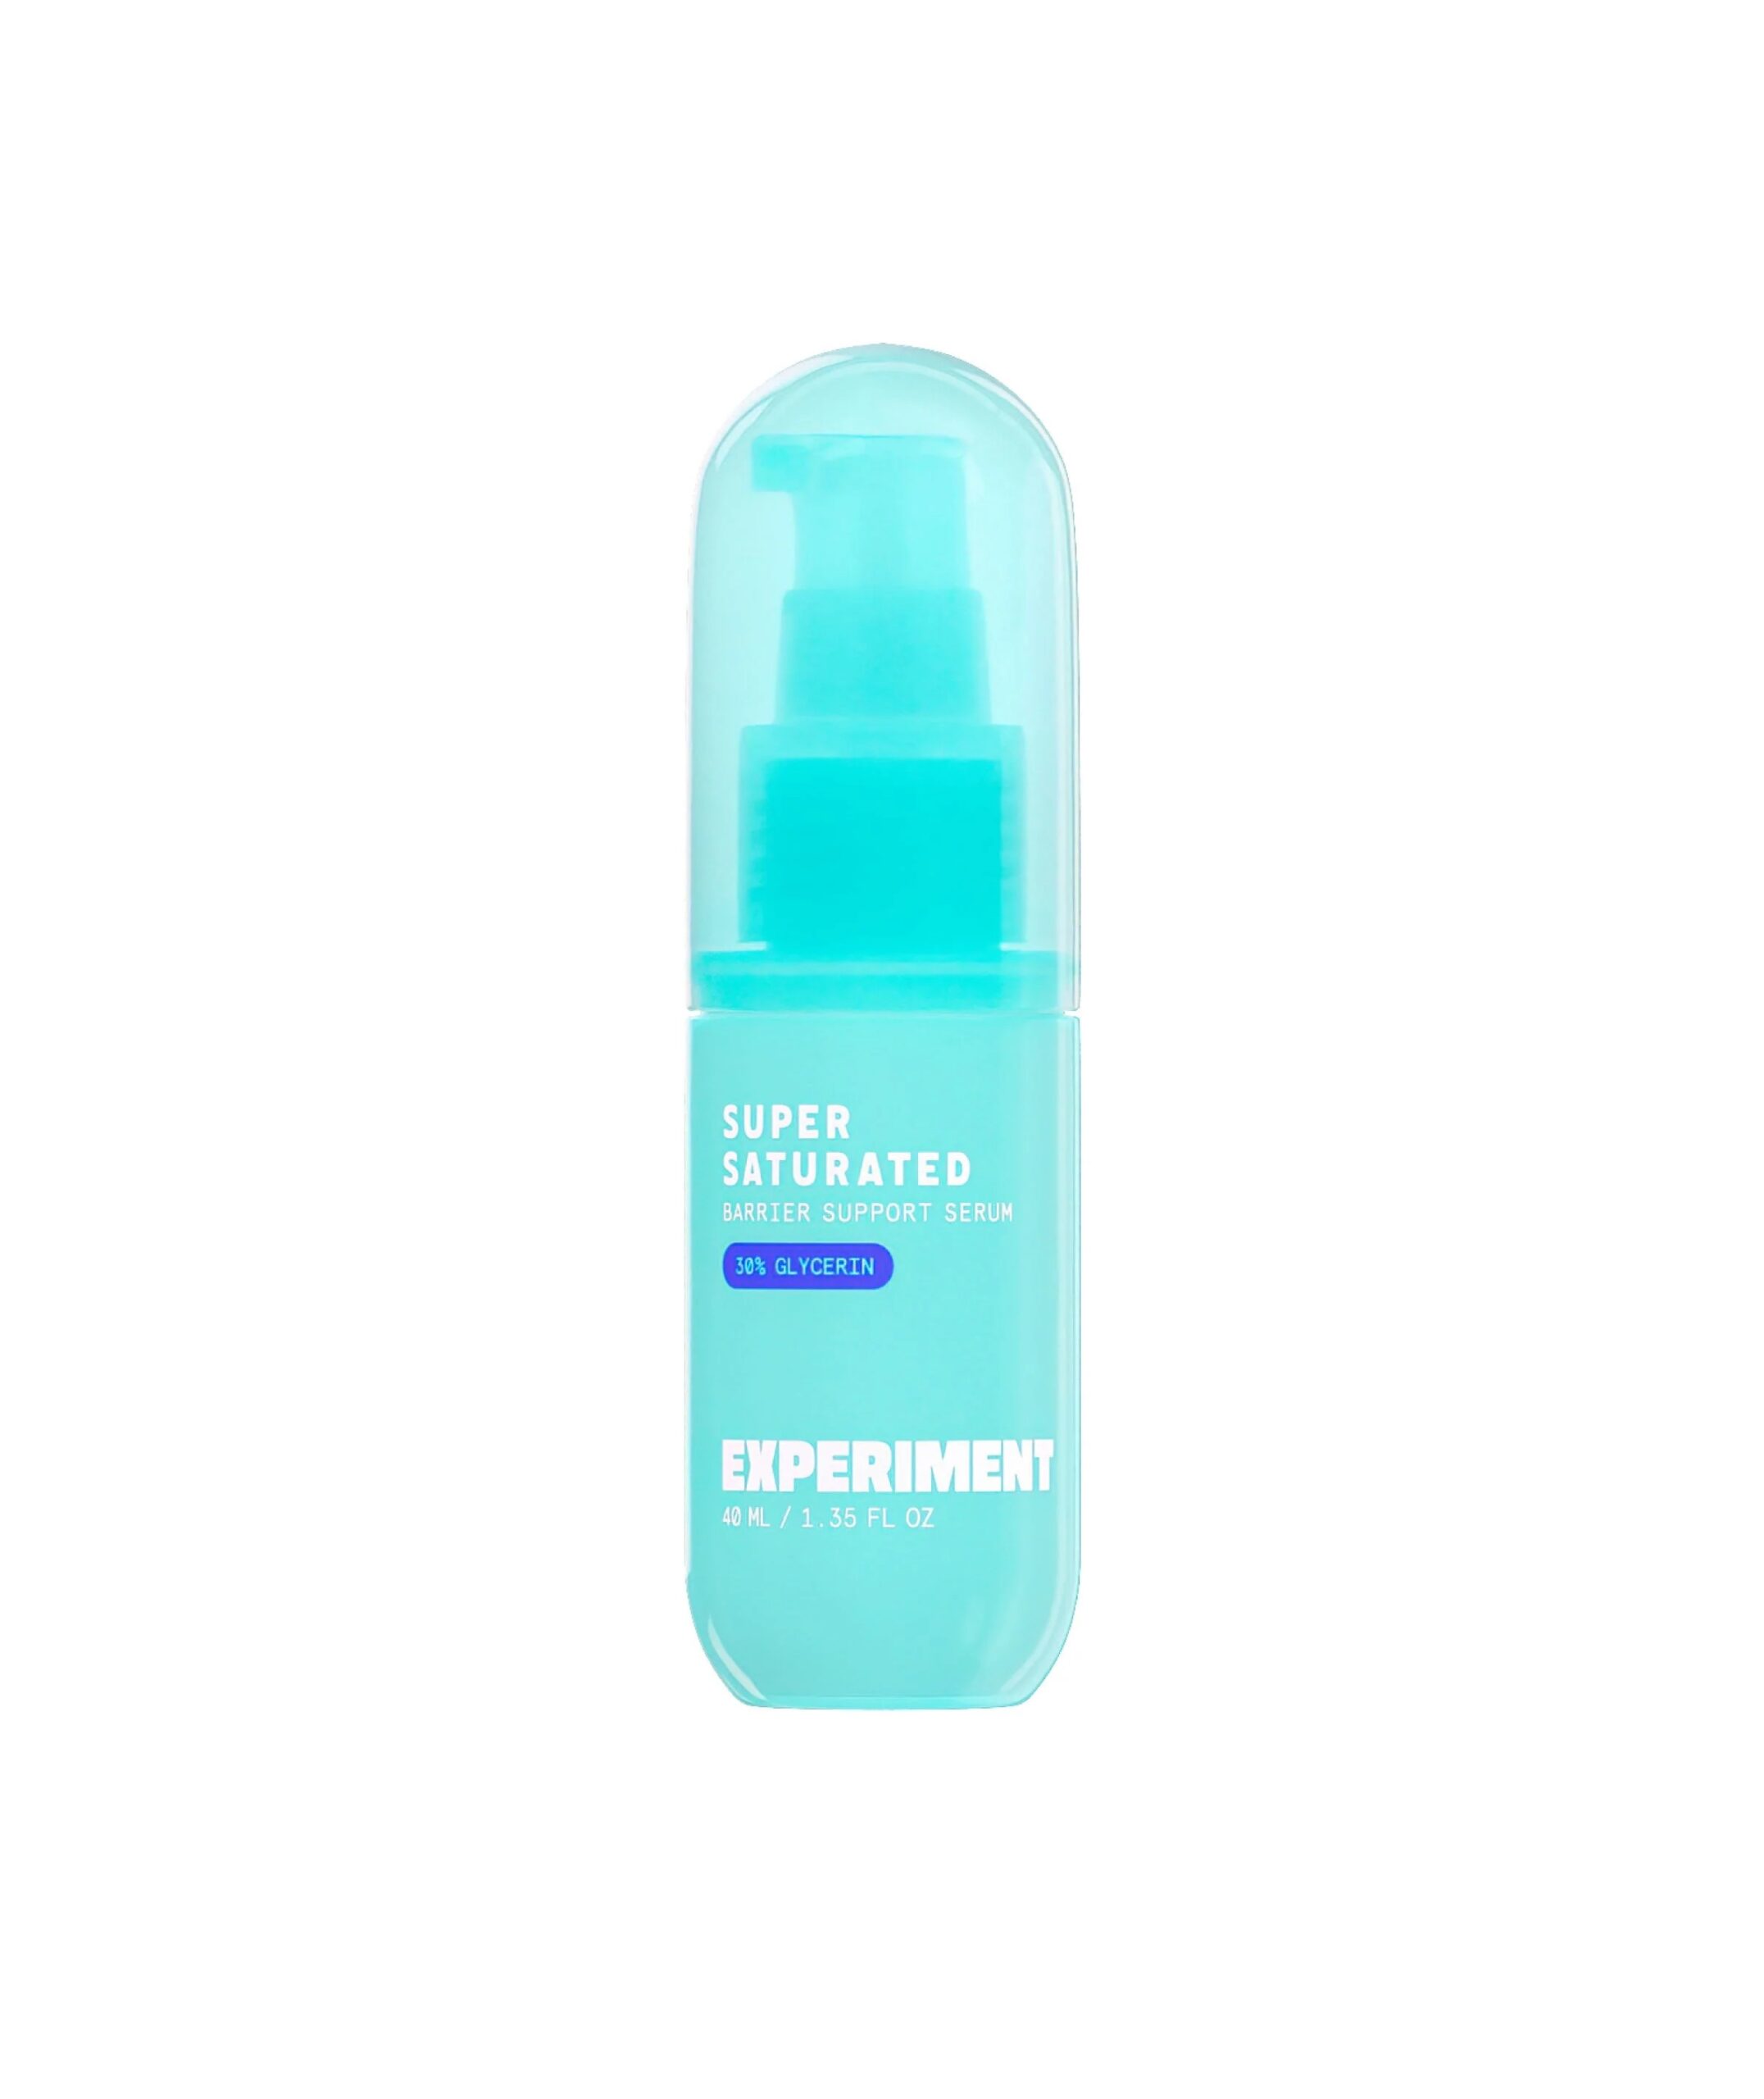 A bottle of Experiment Beauty serum in blue.